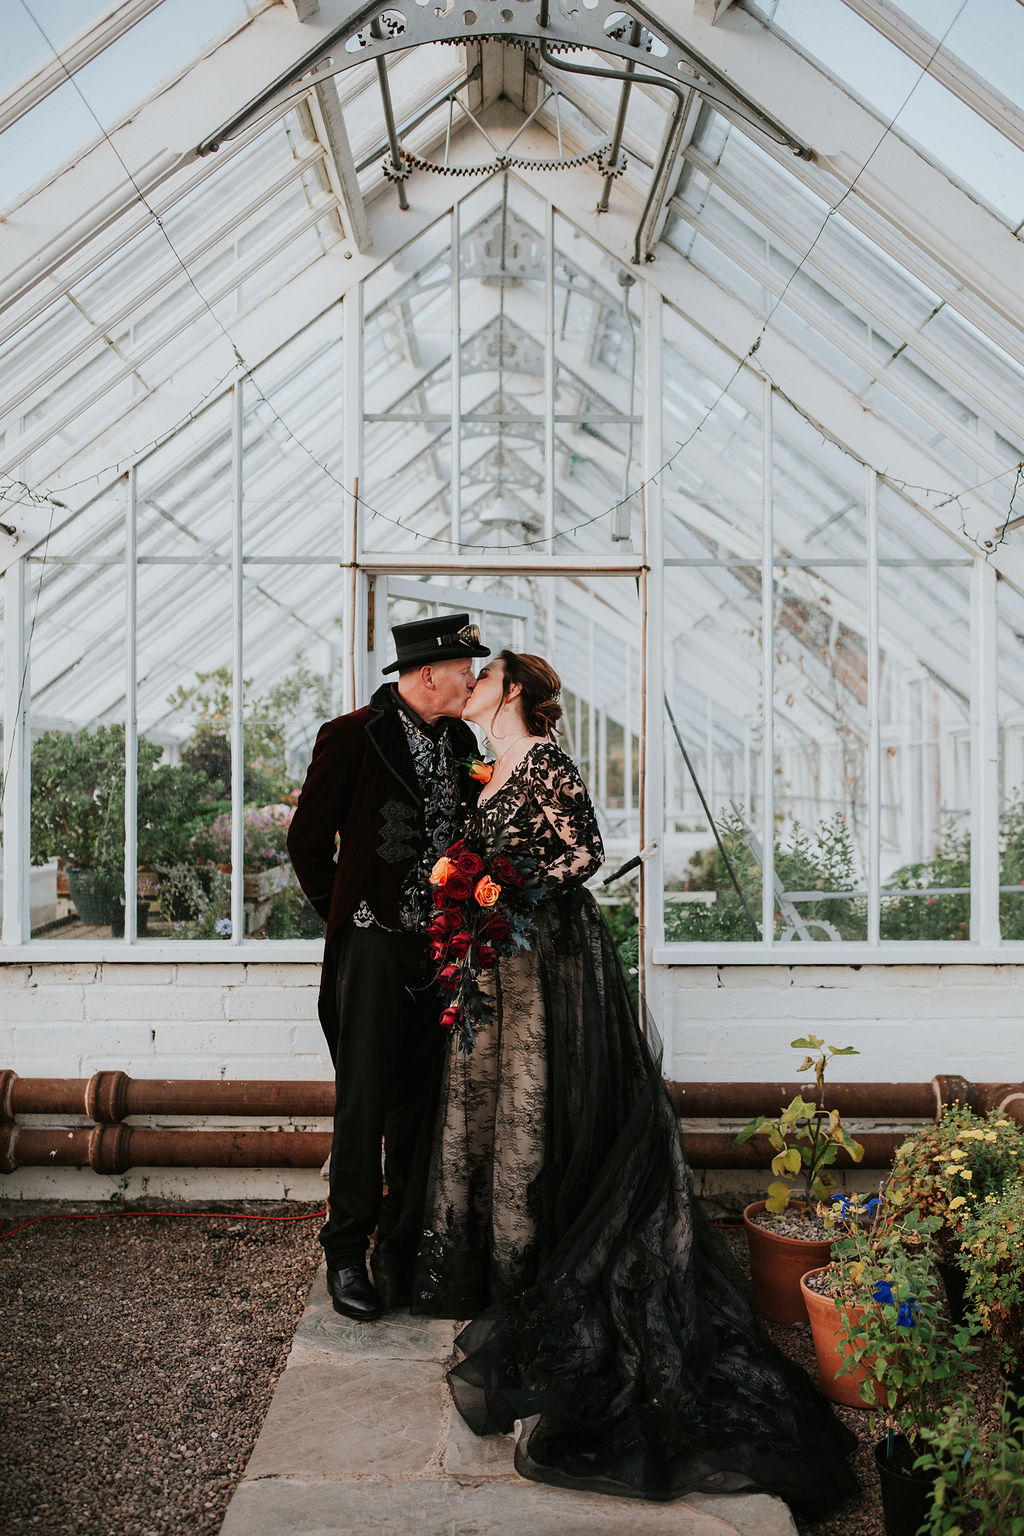 This couple went for a Scottish Victoriana and Halloween themed wedding pulling off all their favorite details